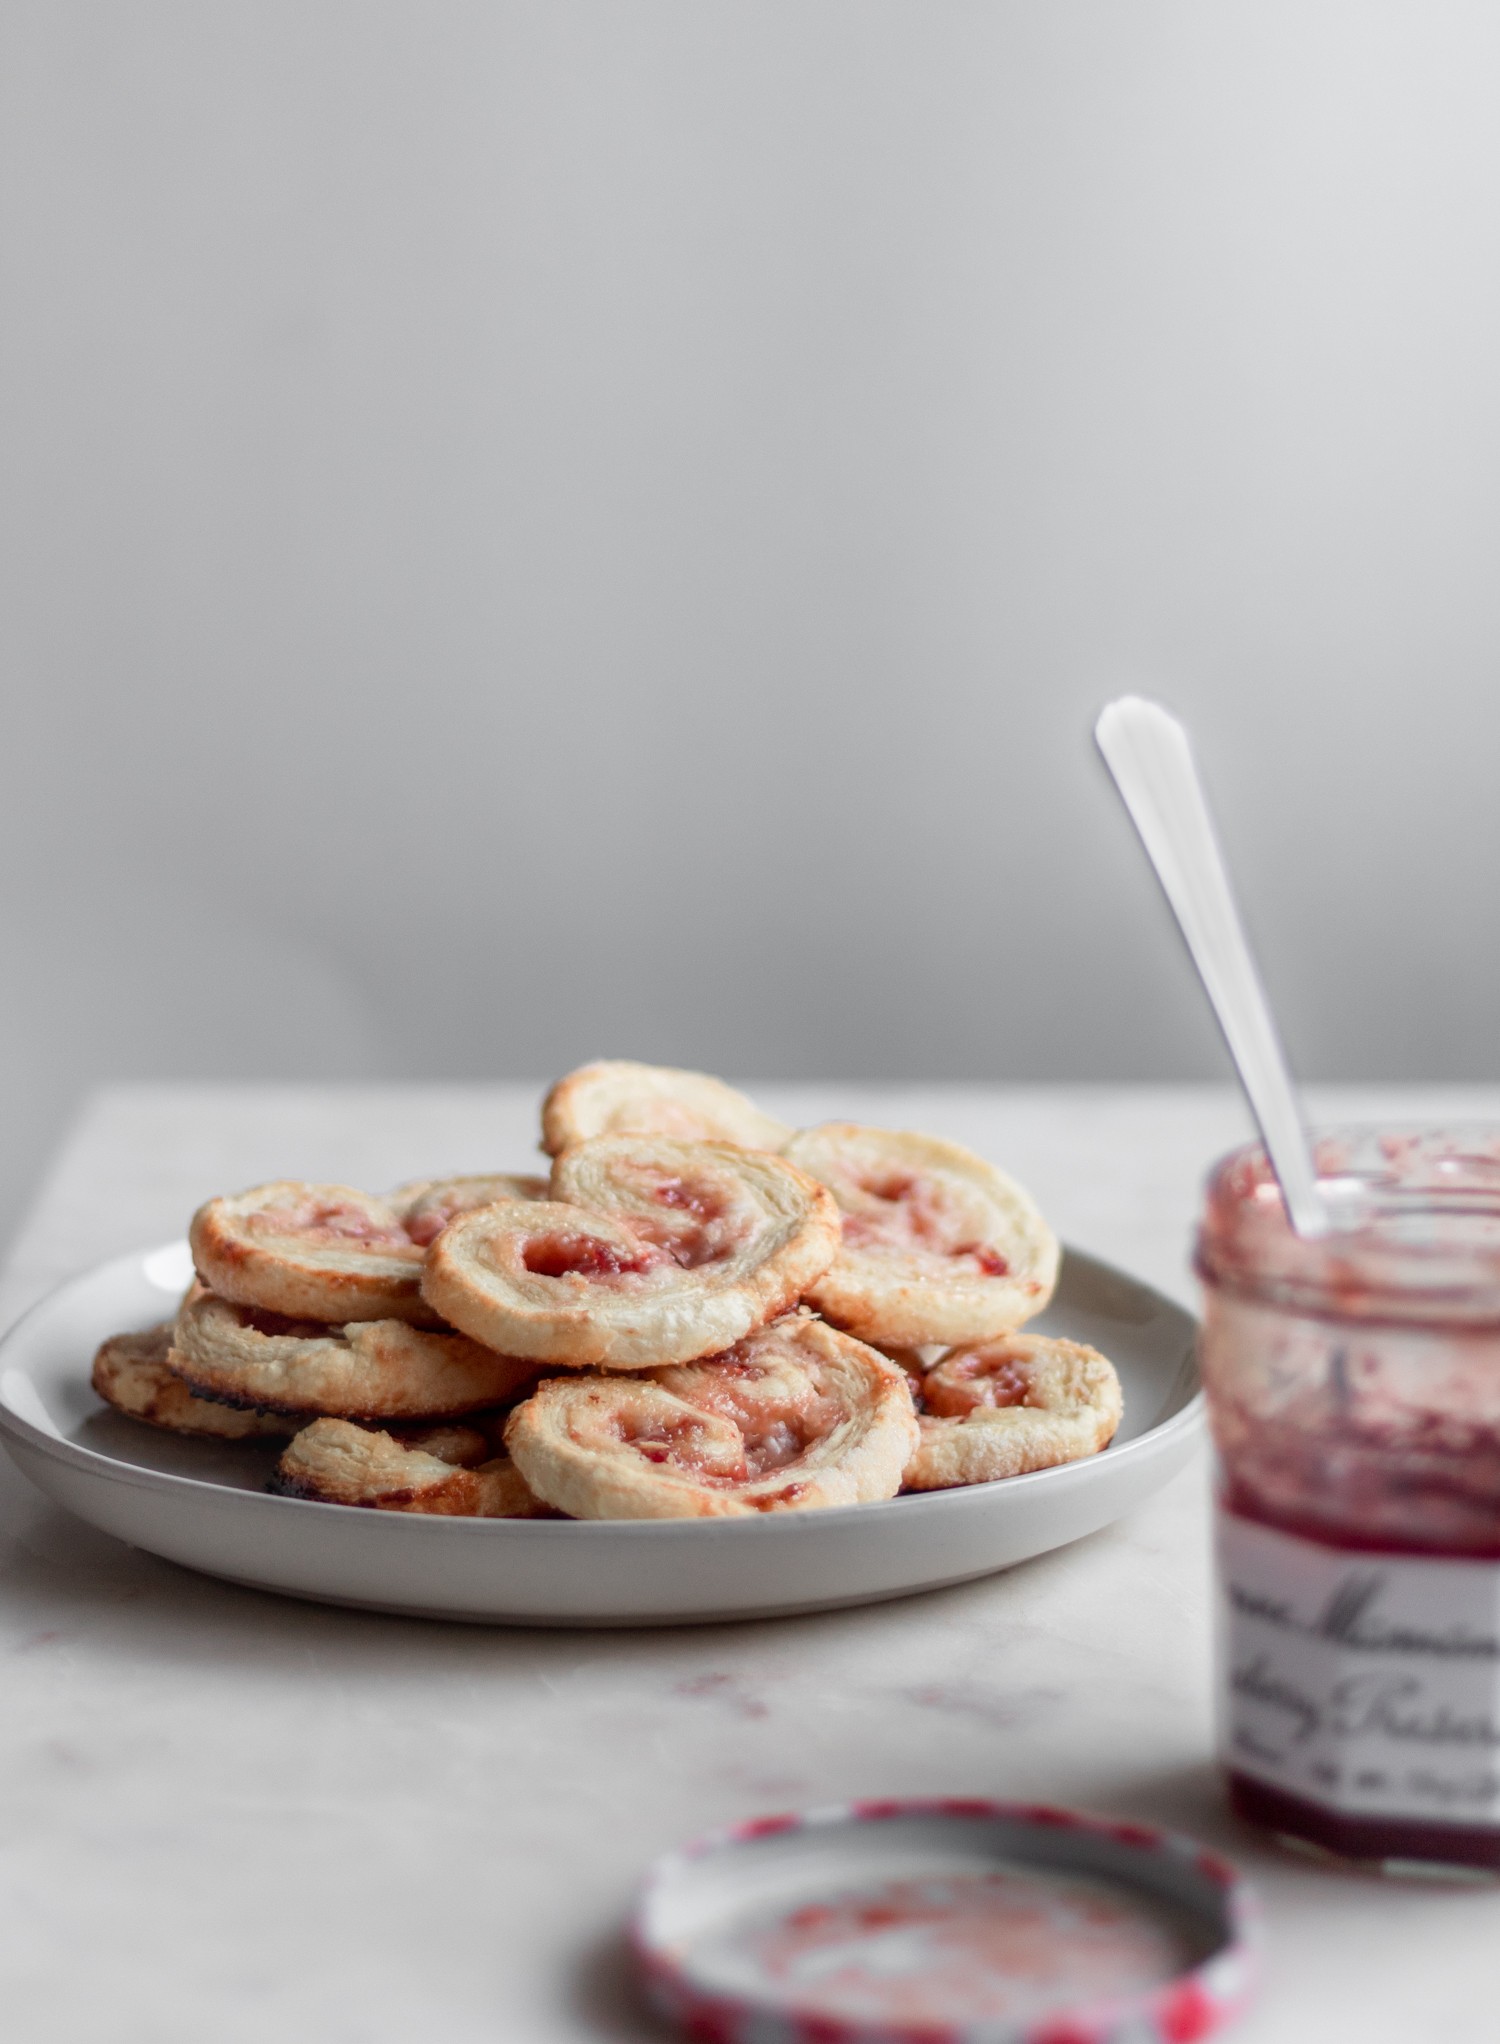 A white plate with a pile of strawberry palmiers with cream cheese filling on a white counter with a jar of jam in the forefront.